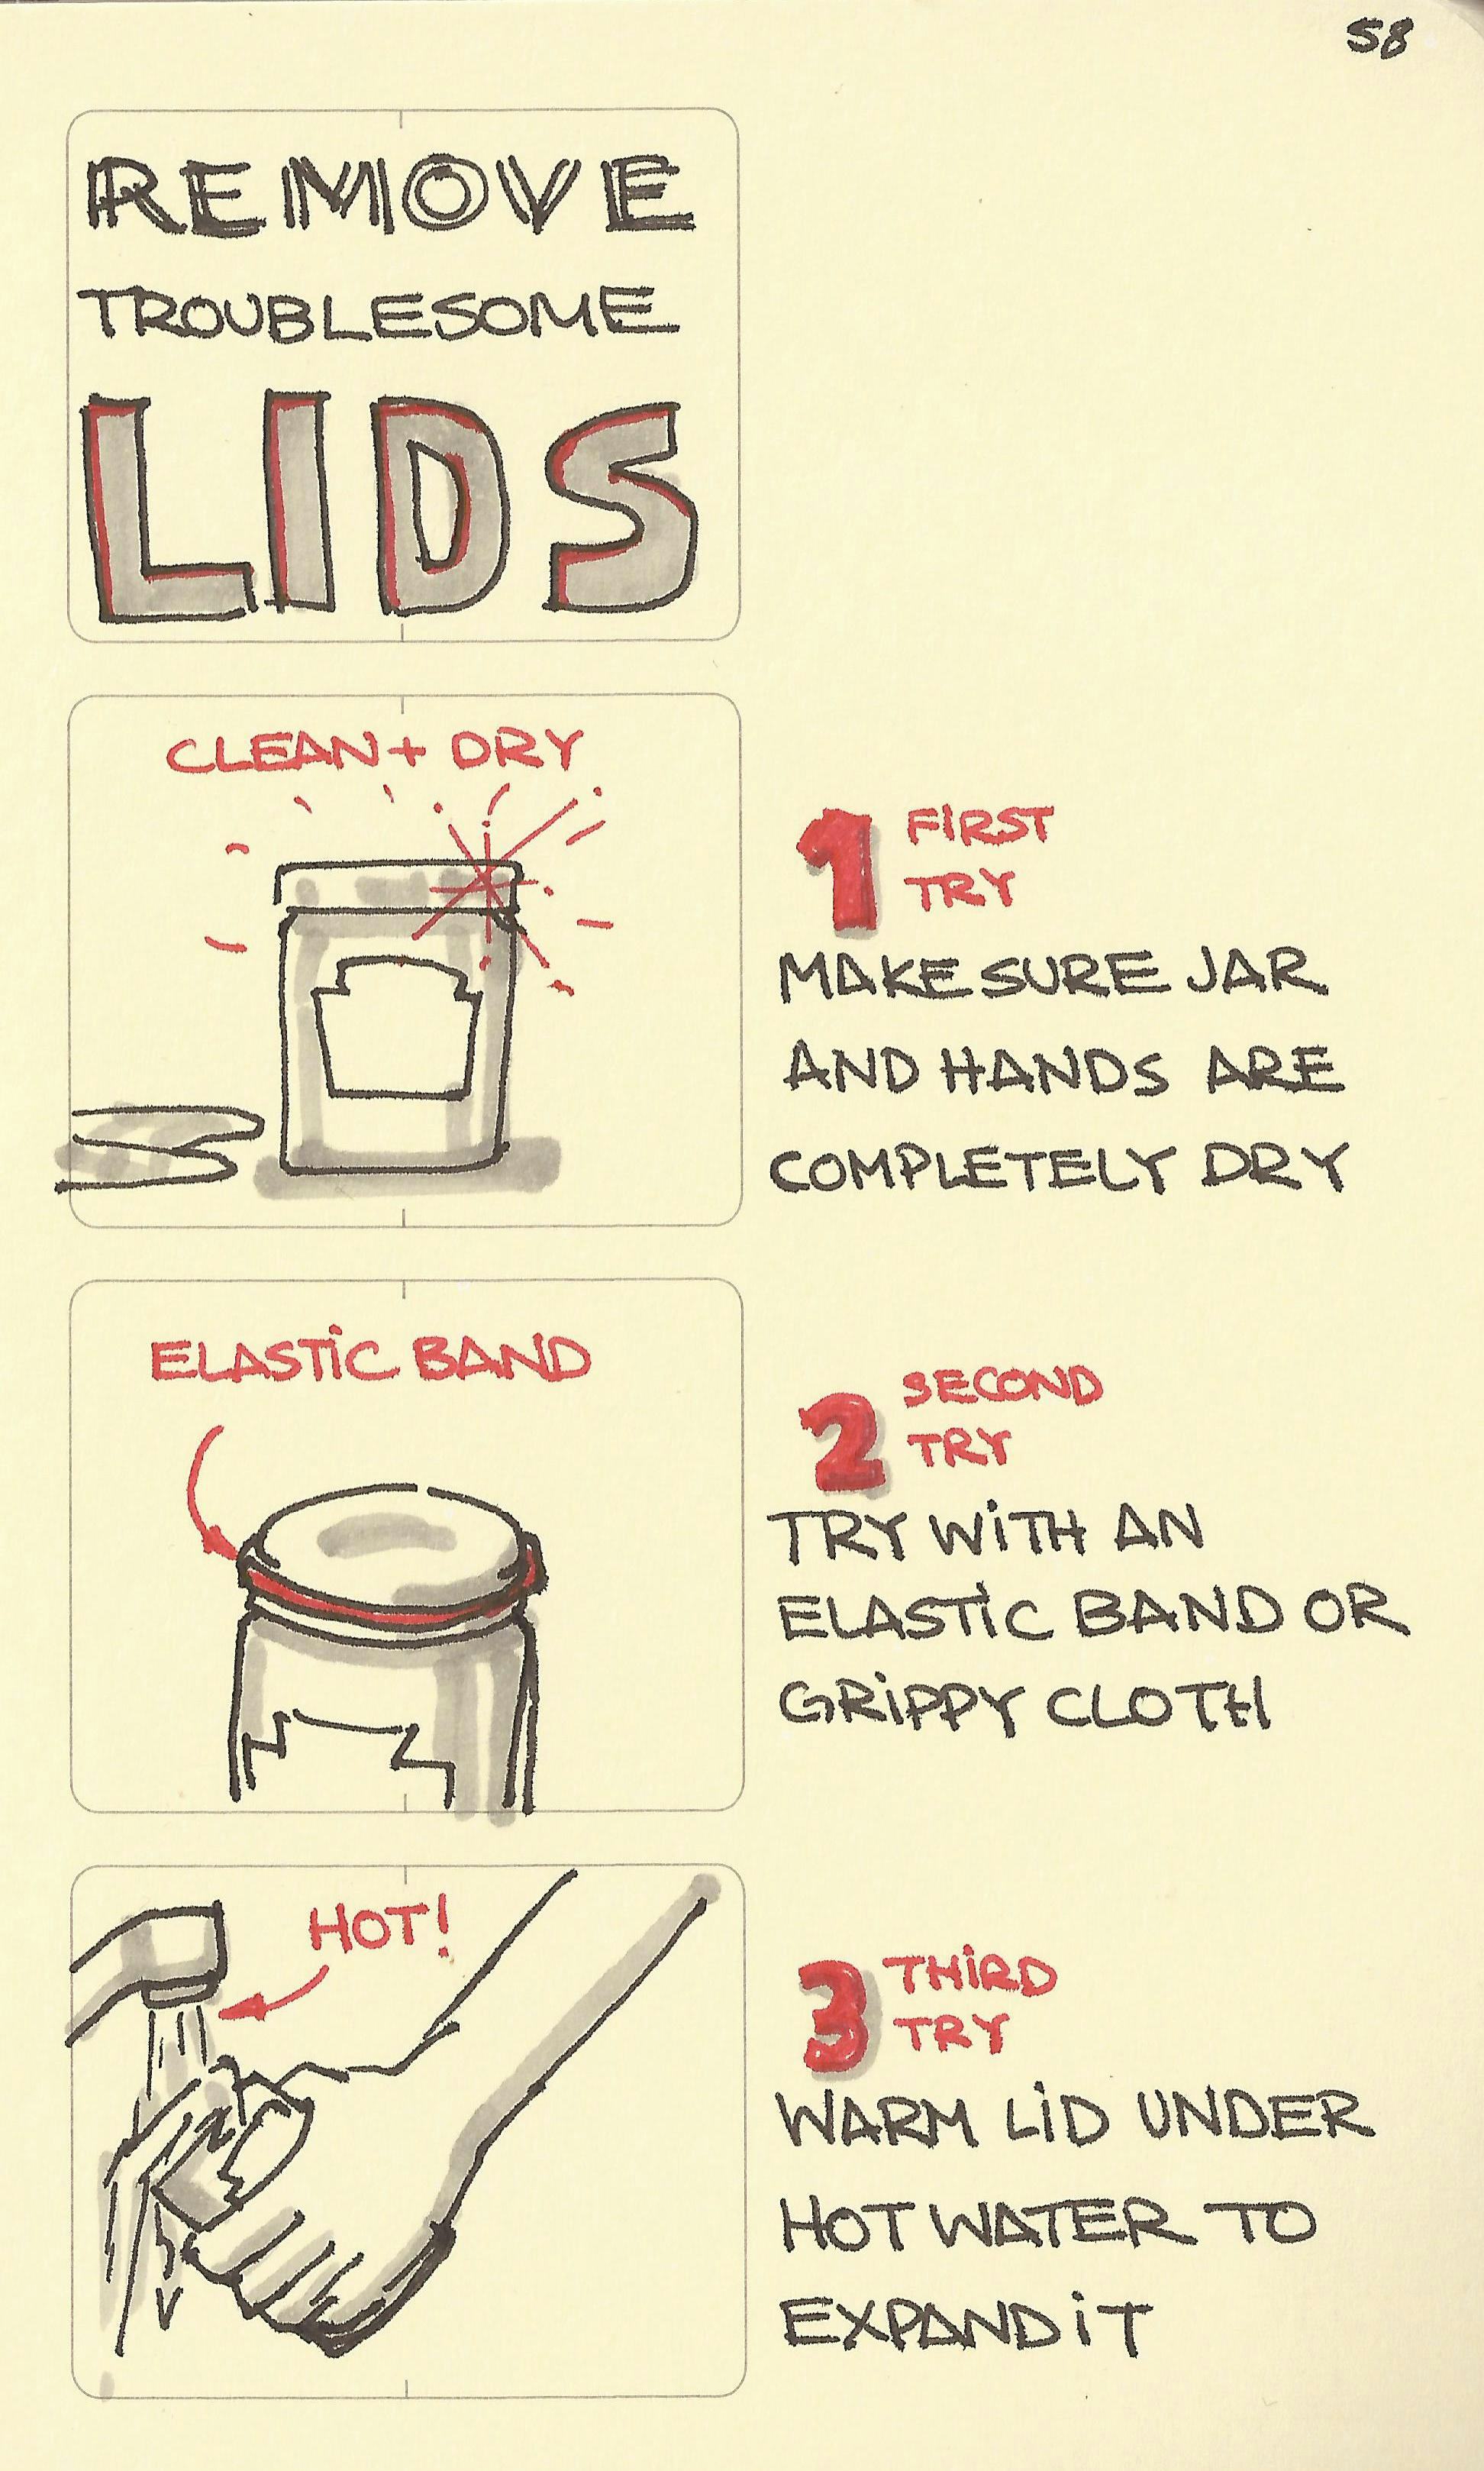 Remove troublesome lids - Sketchplanations